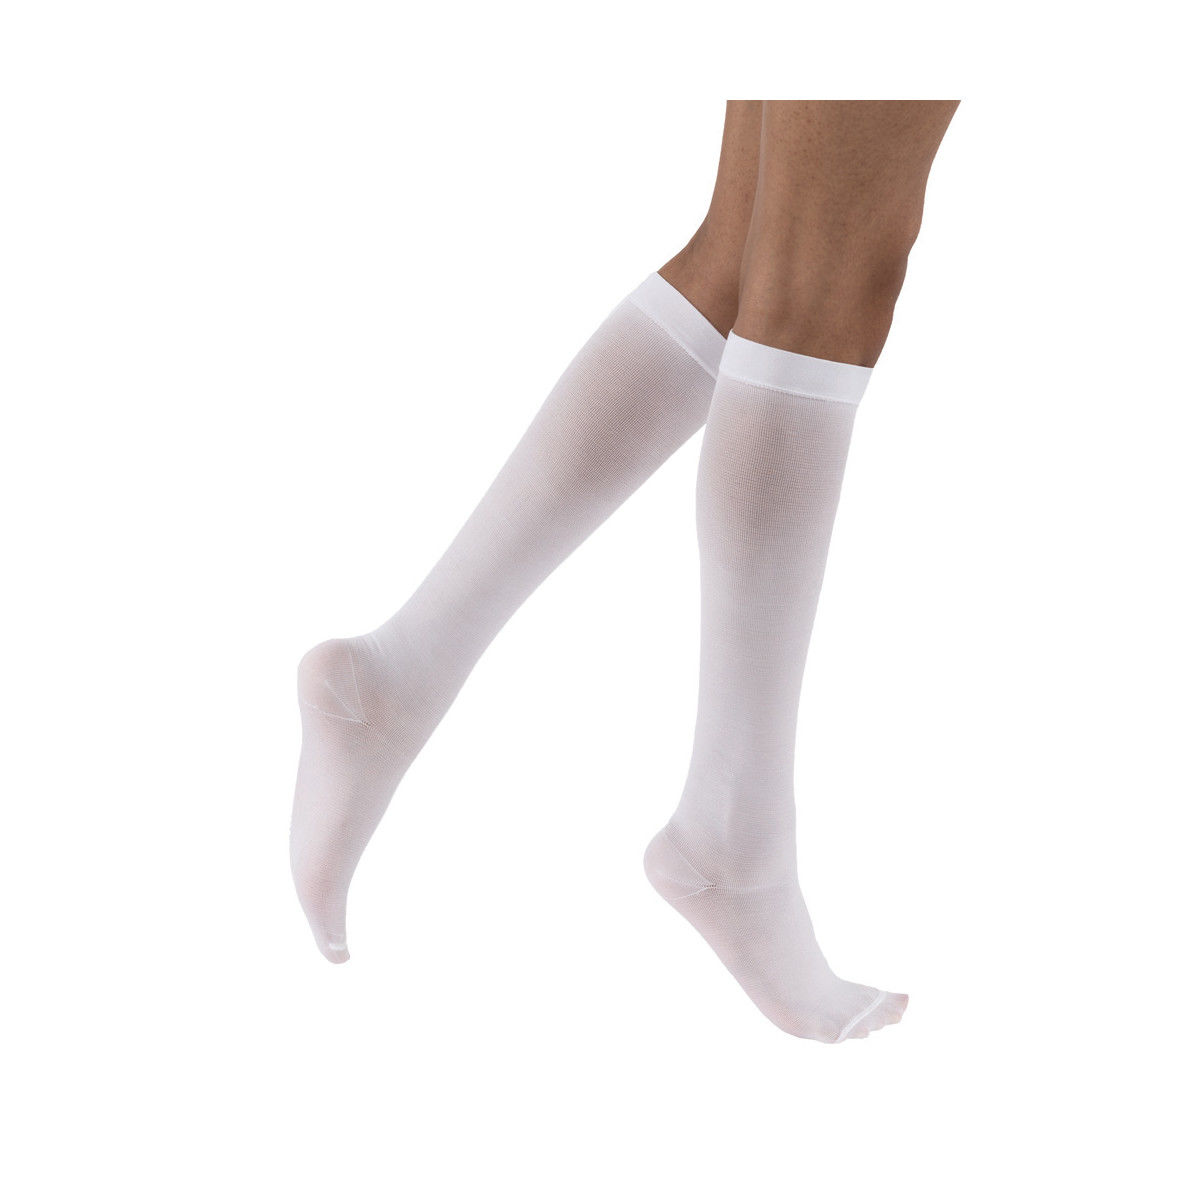 JOBST® ACTIVA Anti-Embolism Thigh High – Compression Stockings